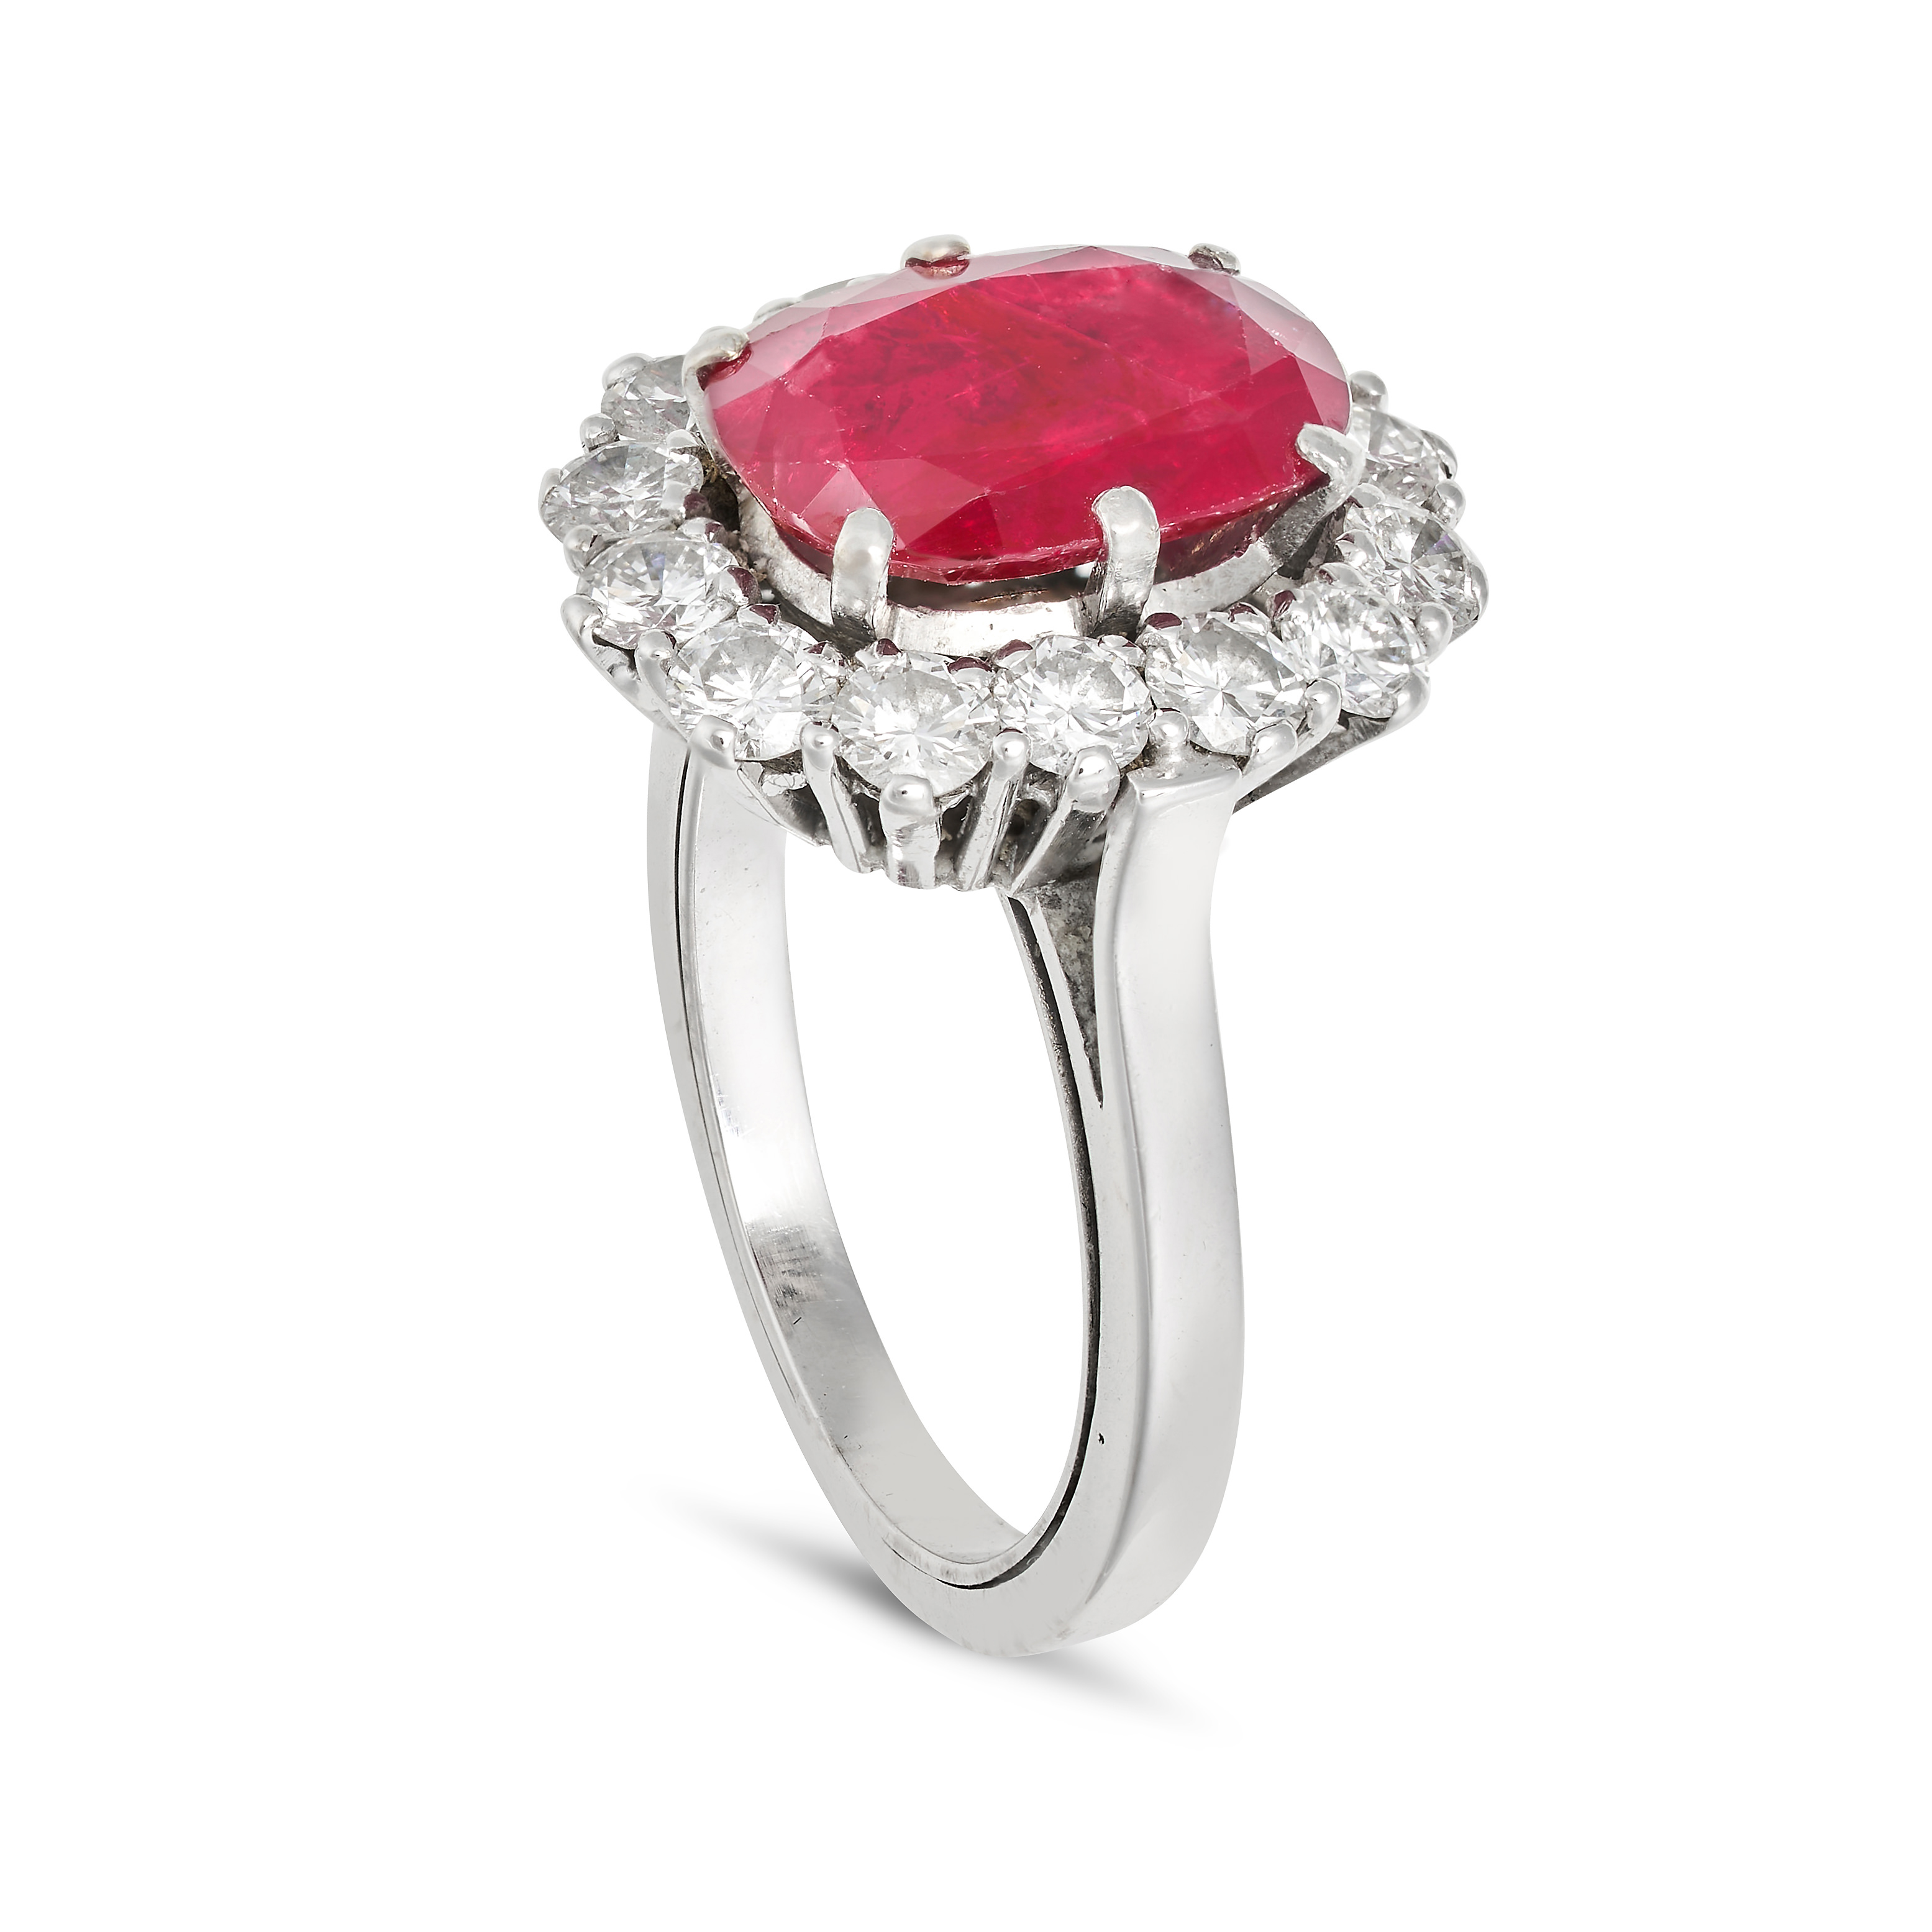 A BURMA NO HEAT RUBY AND DIAMOND CLUSTER RING in 18ct white gold, set with a cushion cut ruby of ... - Image 2 of 2